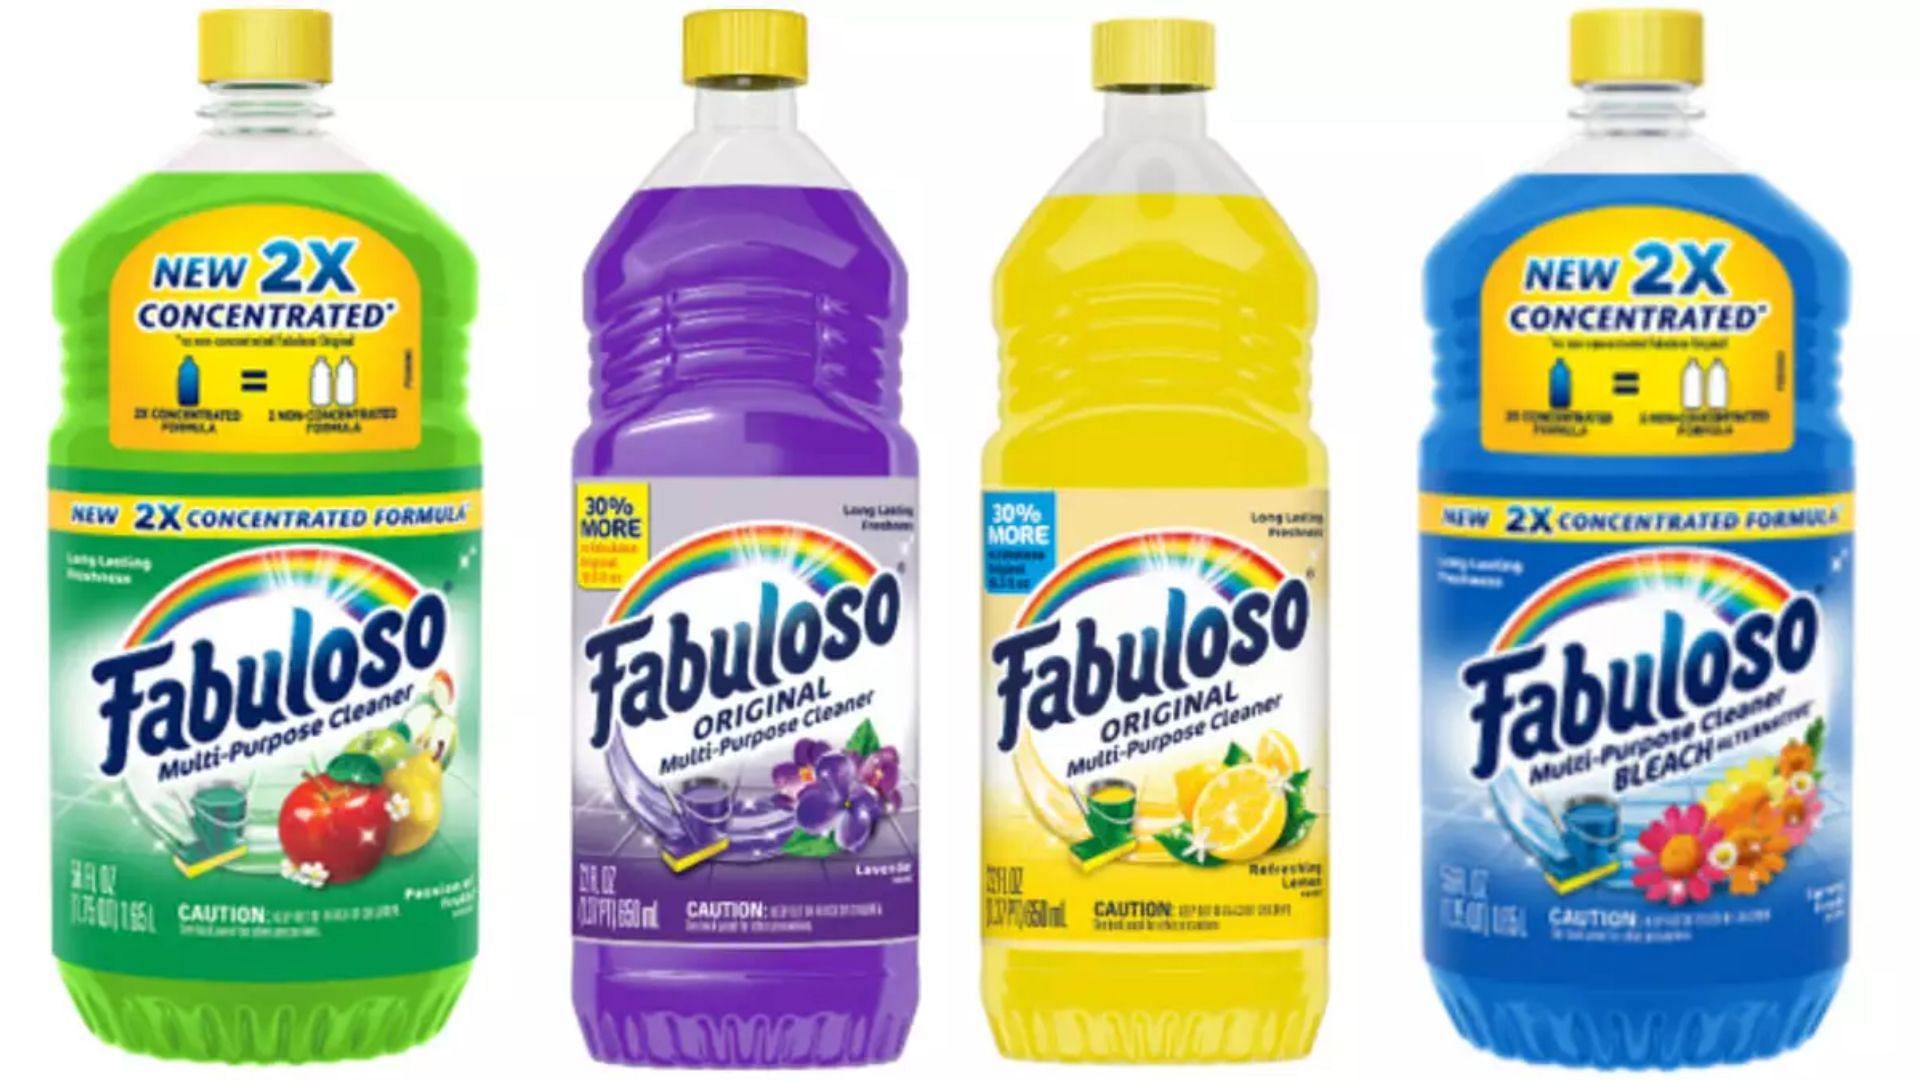 Fabuloso cleaners are getting recalled. (Image via Consumer Product Safety Commission)